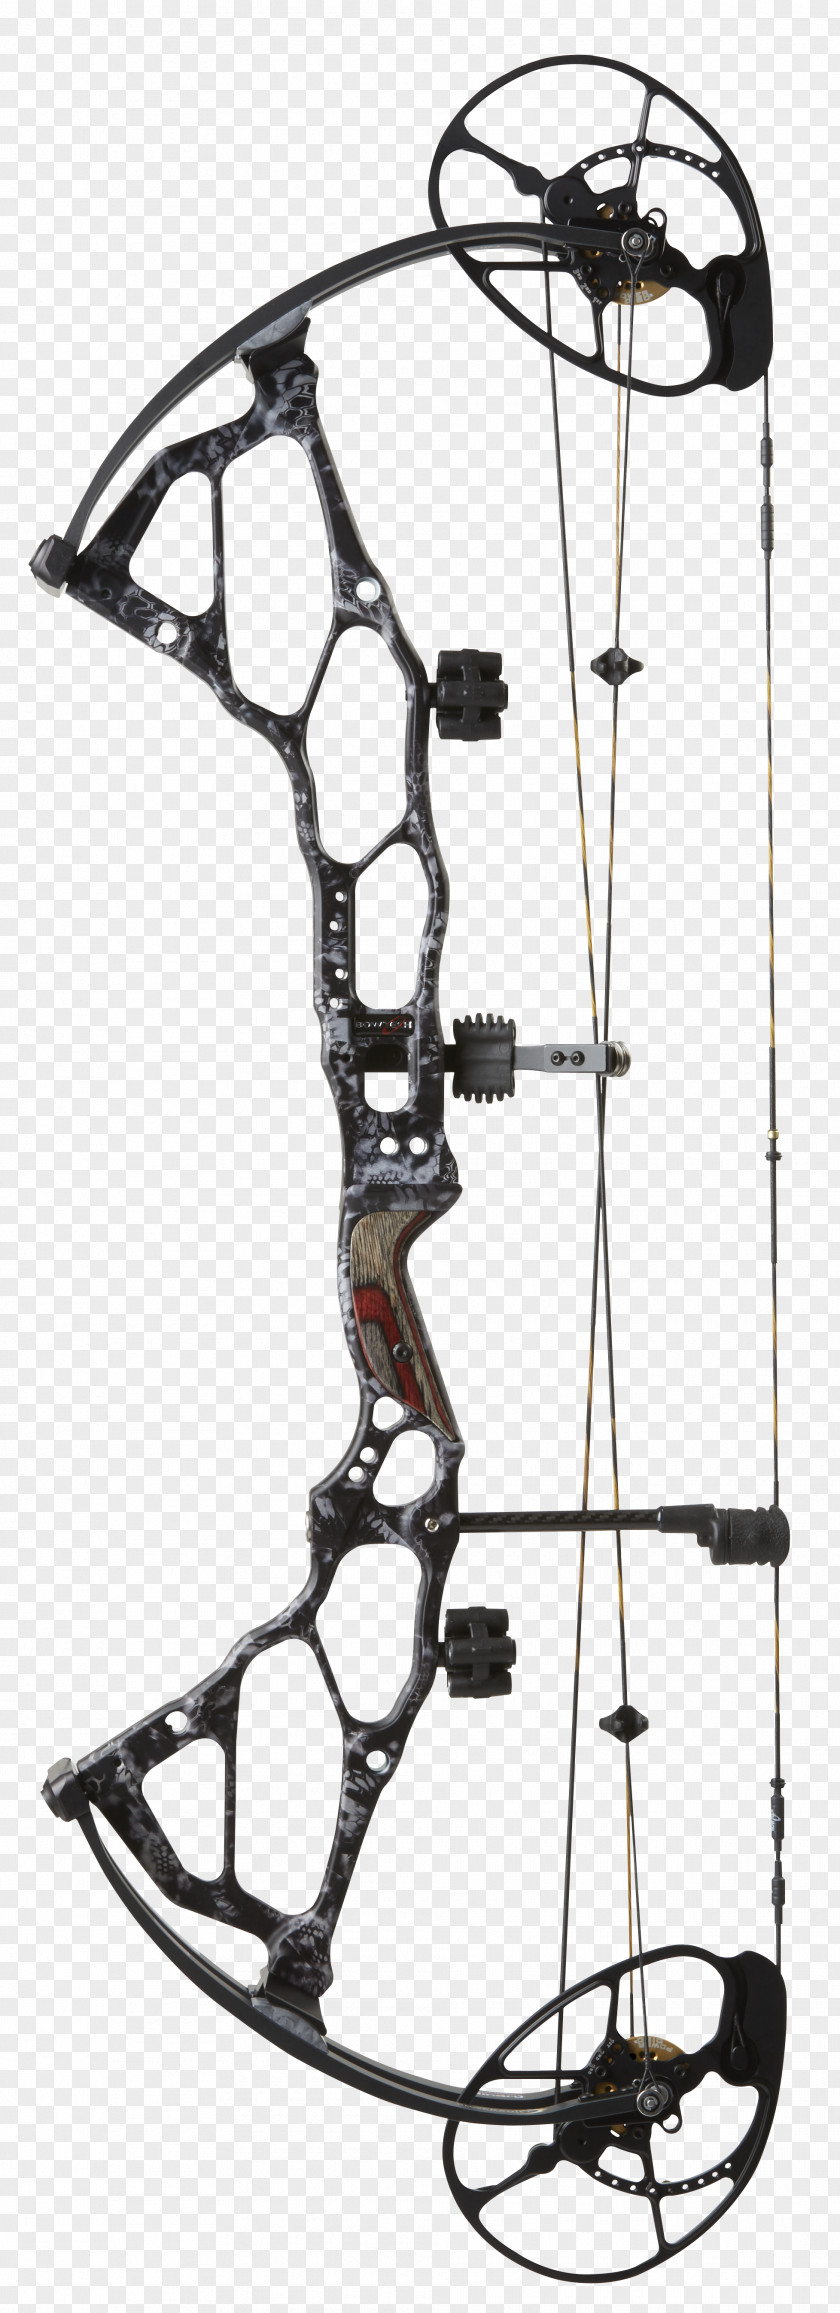 Bow And Arrow Compound Bows Archery Bowhunting PNG